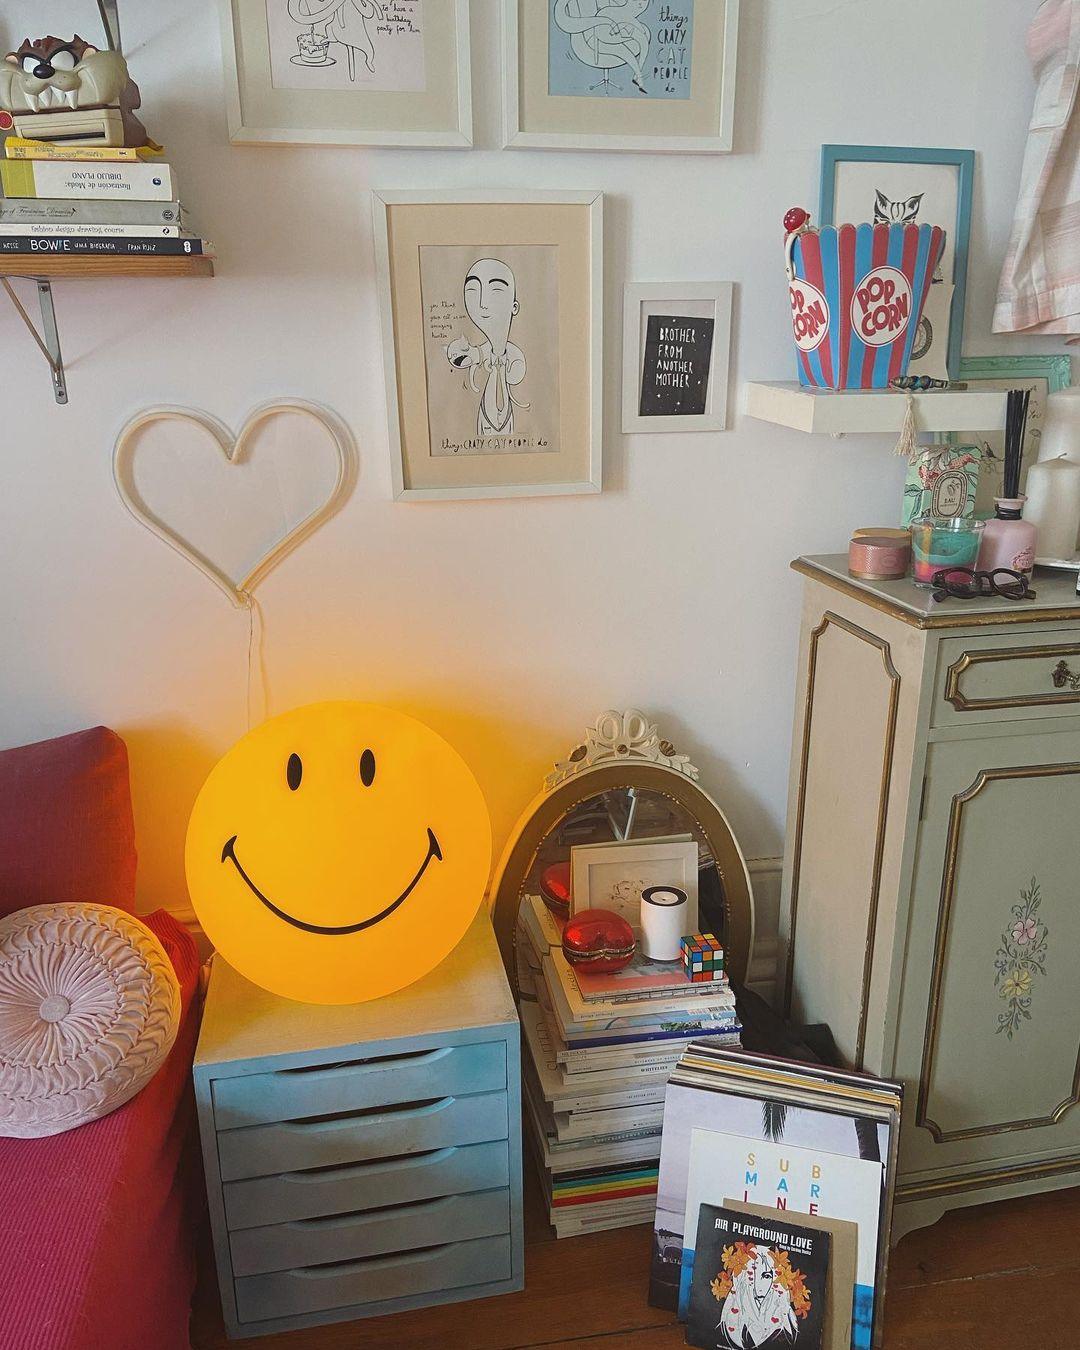 Smiling Table Lamp